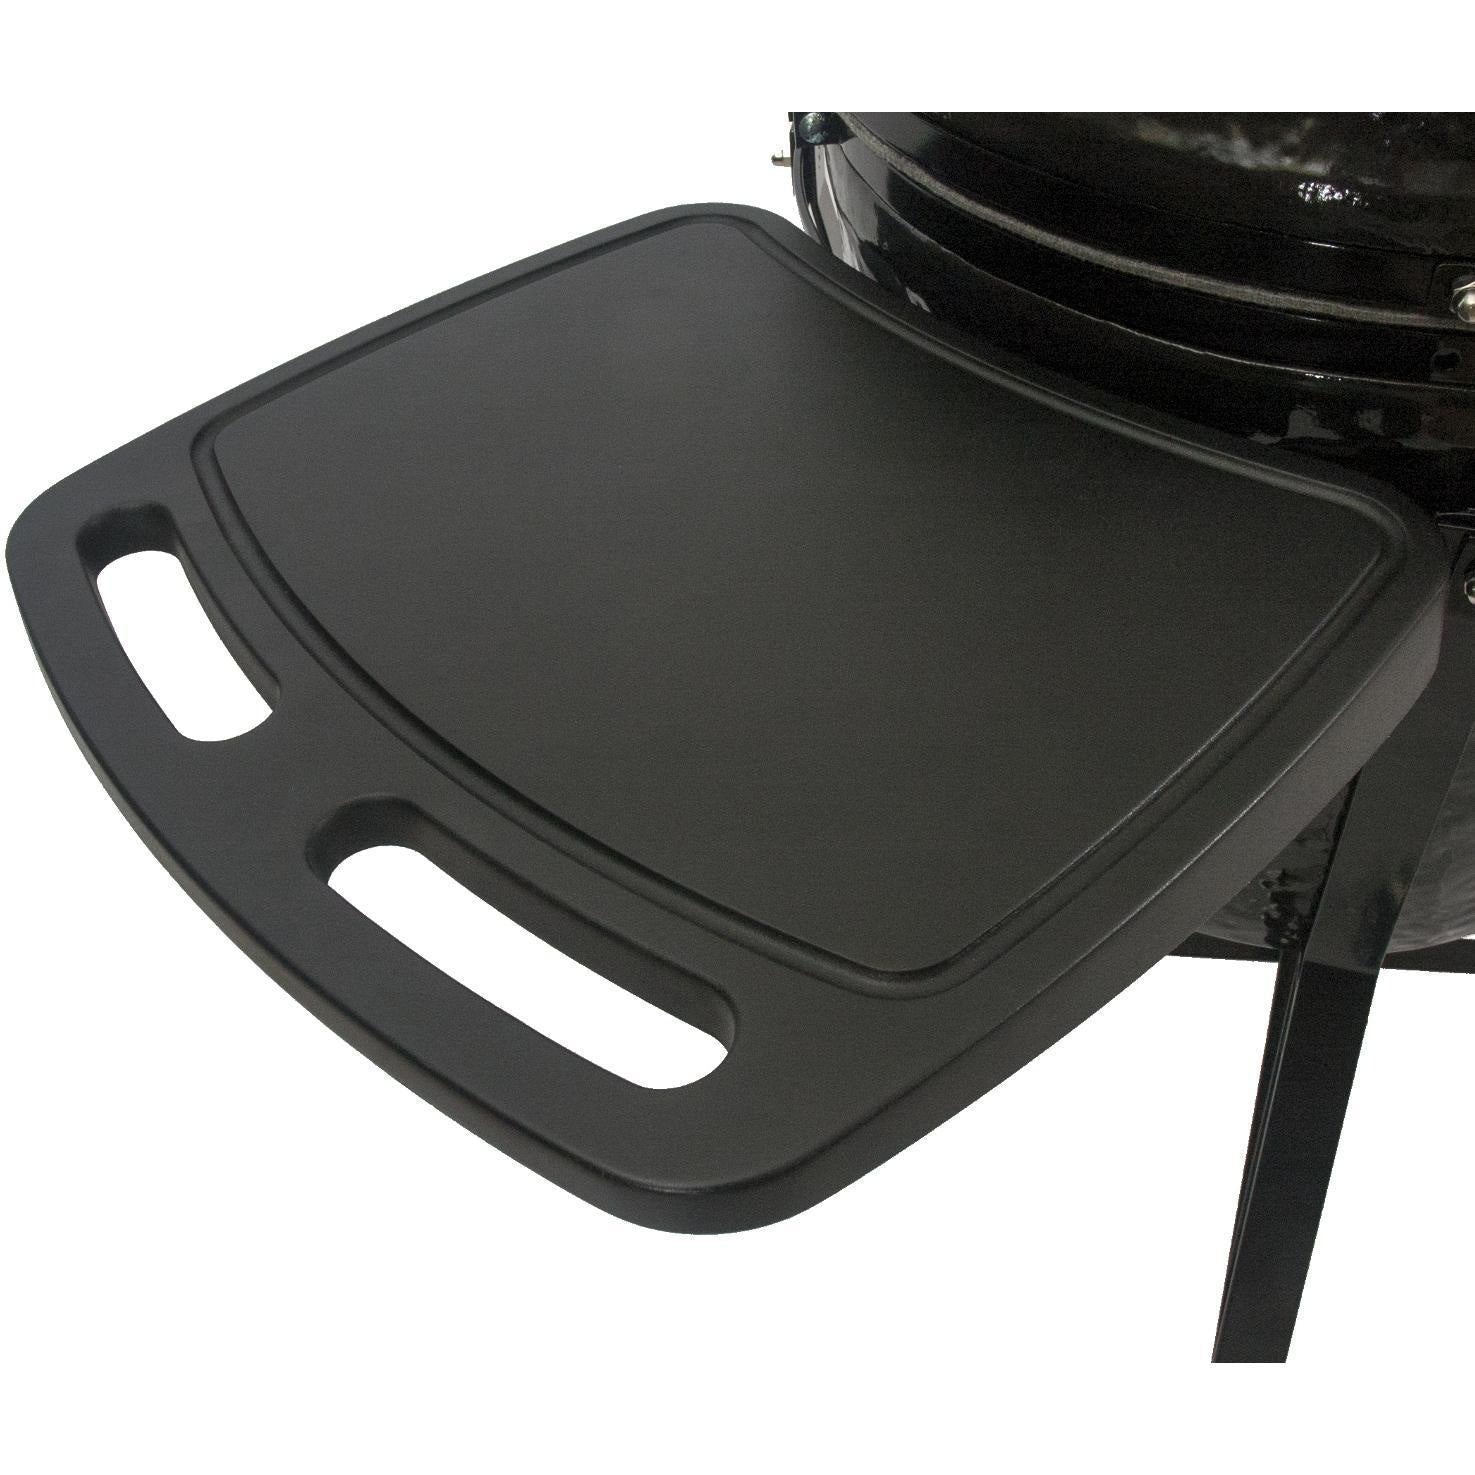 Primo All-In-One Oval LG 300 Charcoal Ceramic Kamado Grill - PGCLGC